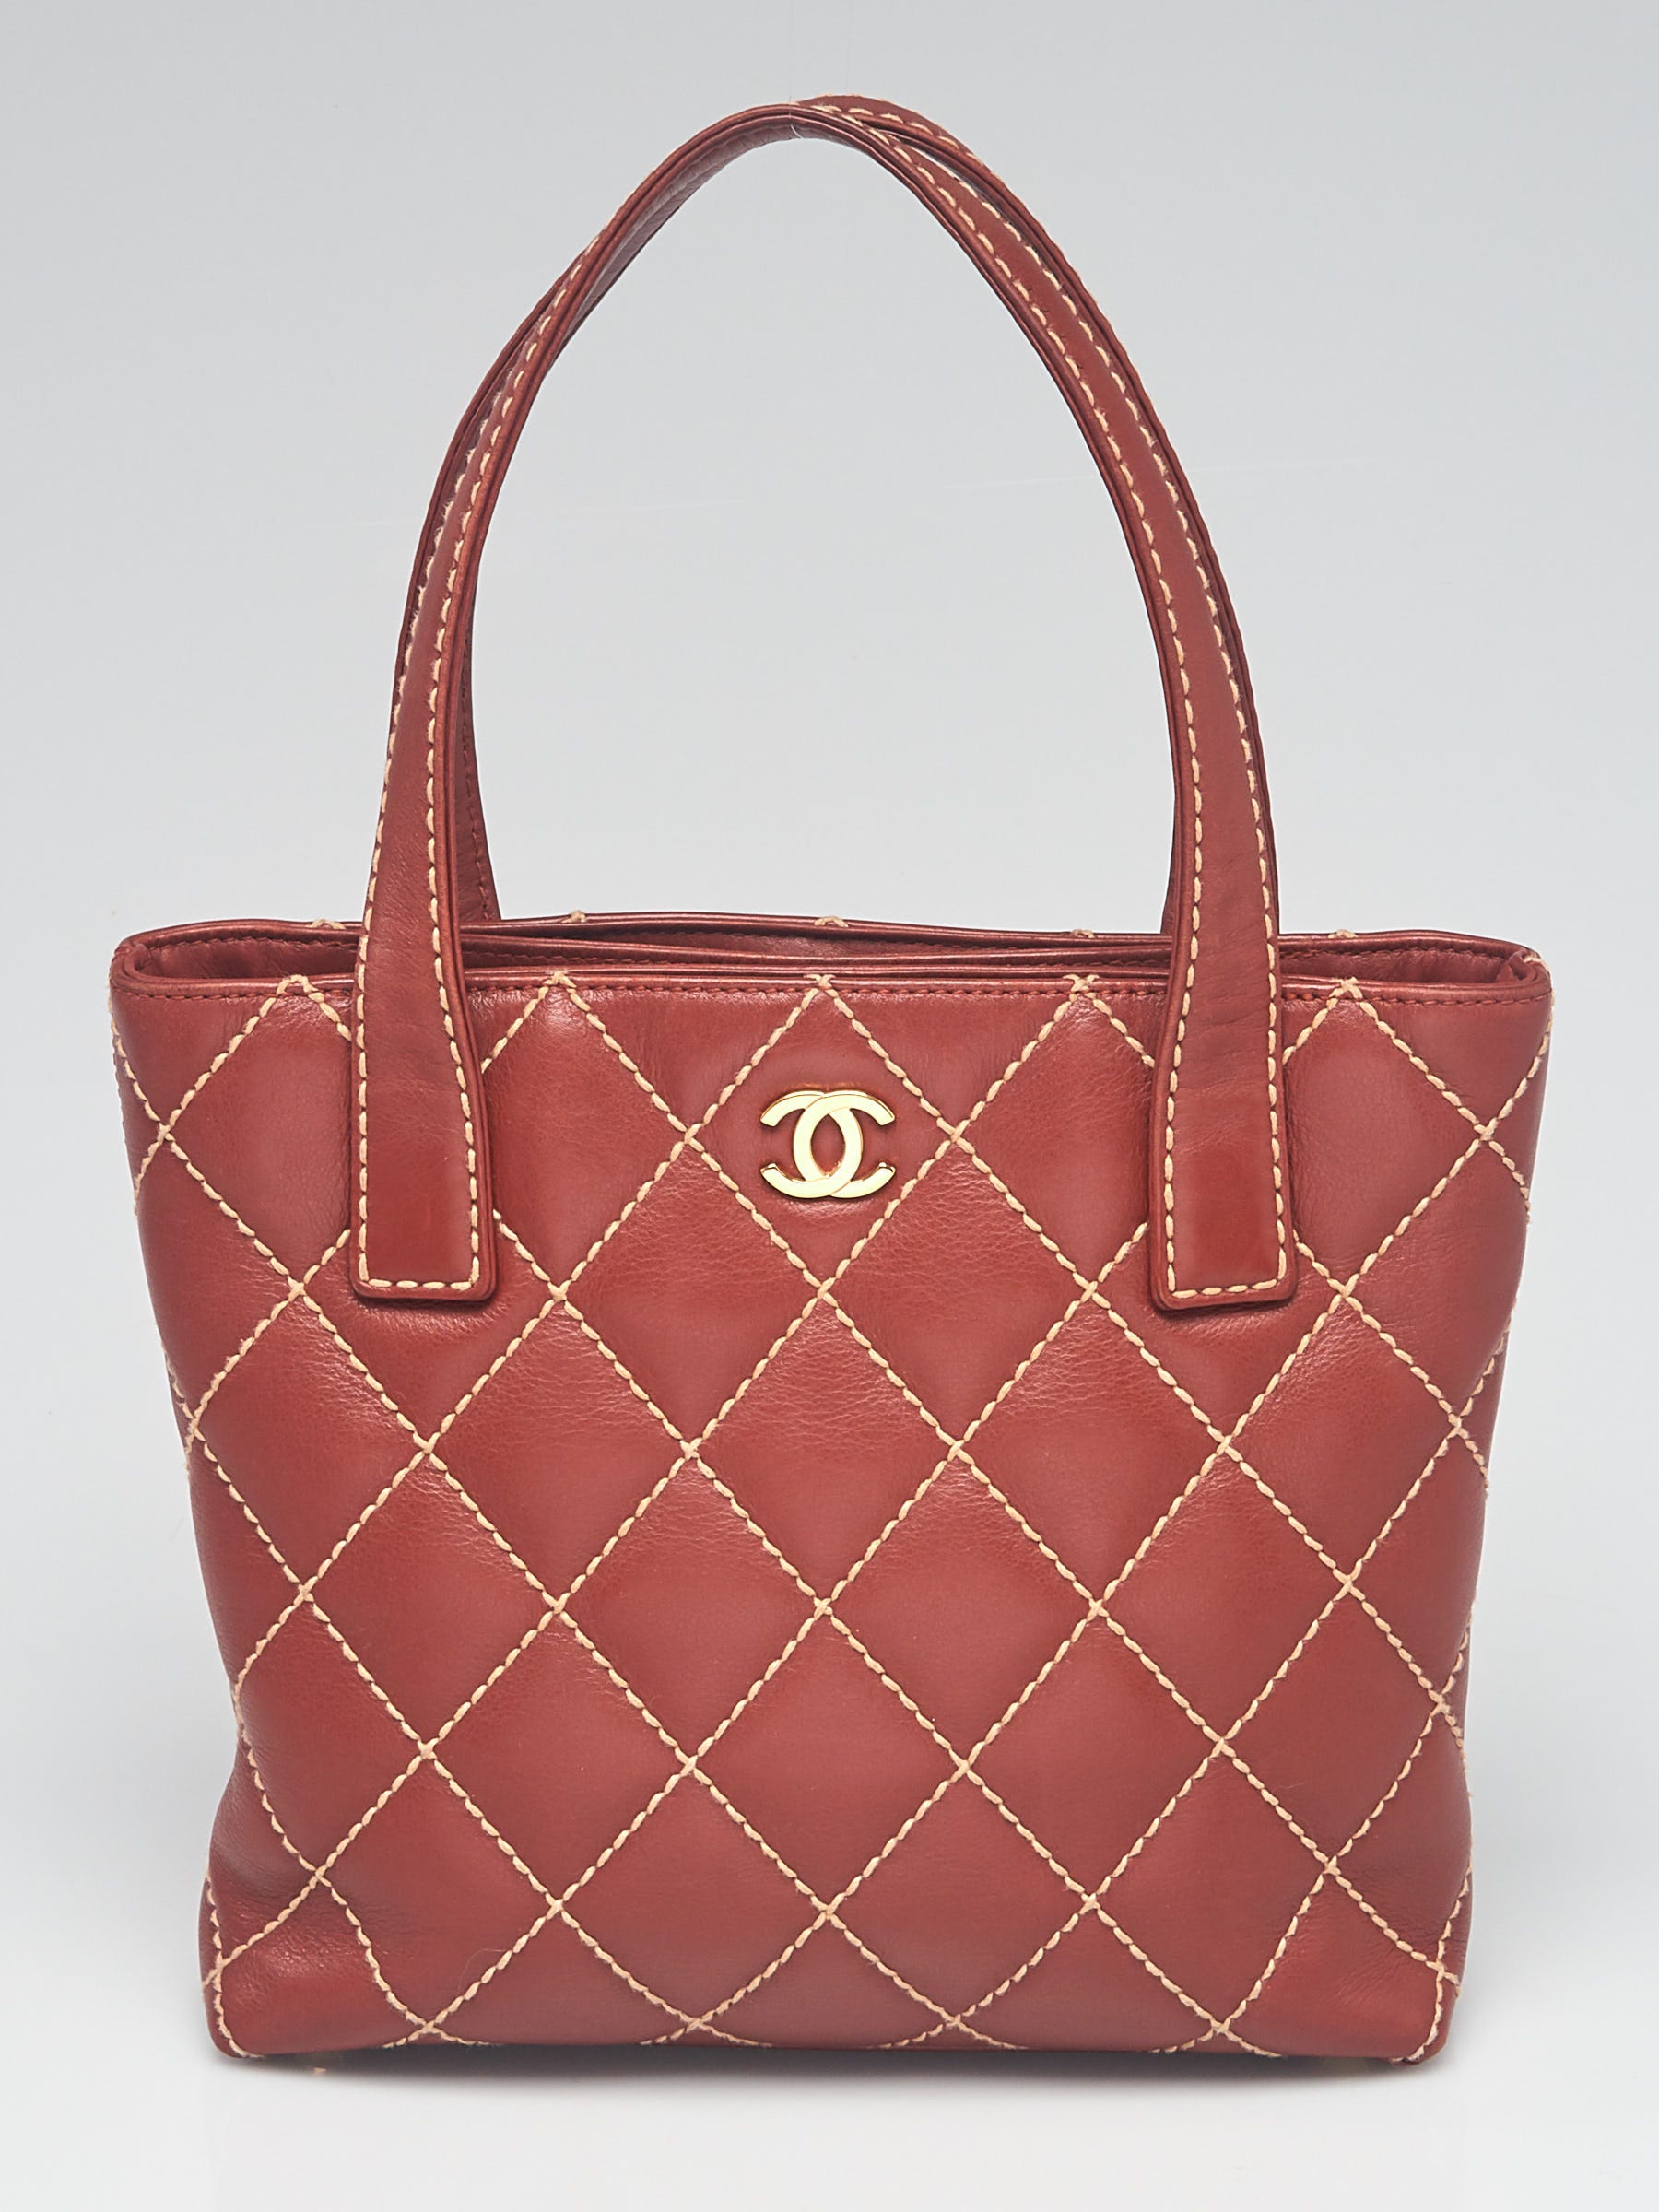 Chanel Brown Quilted Leather Wild Stitch Shoulder Bag Chanel